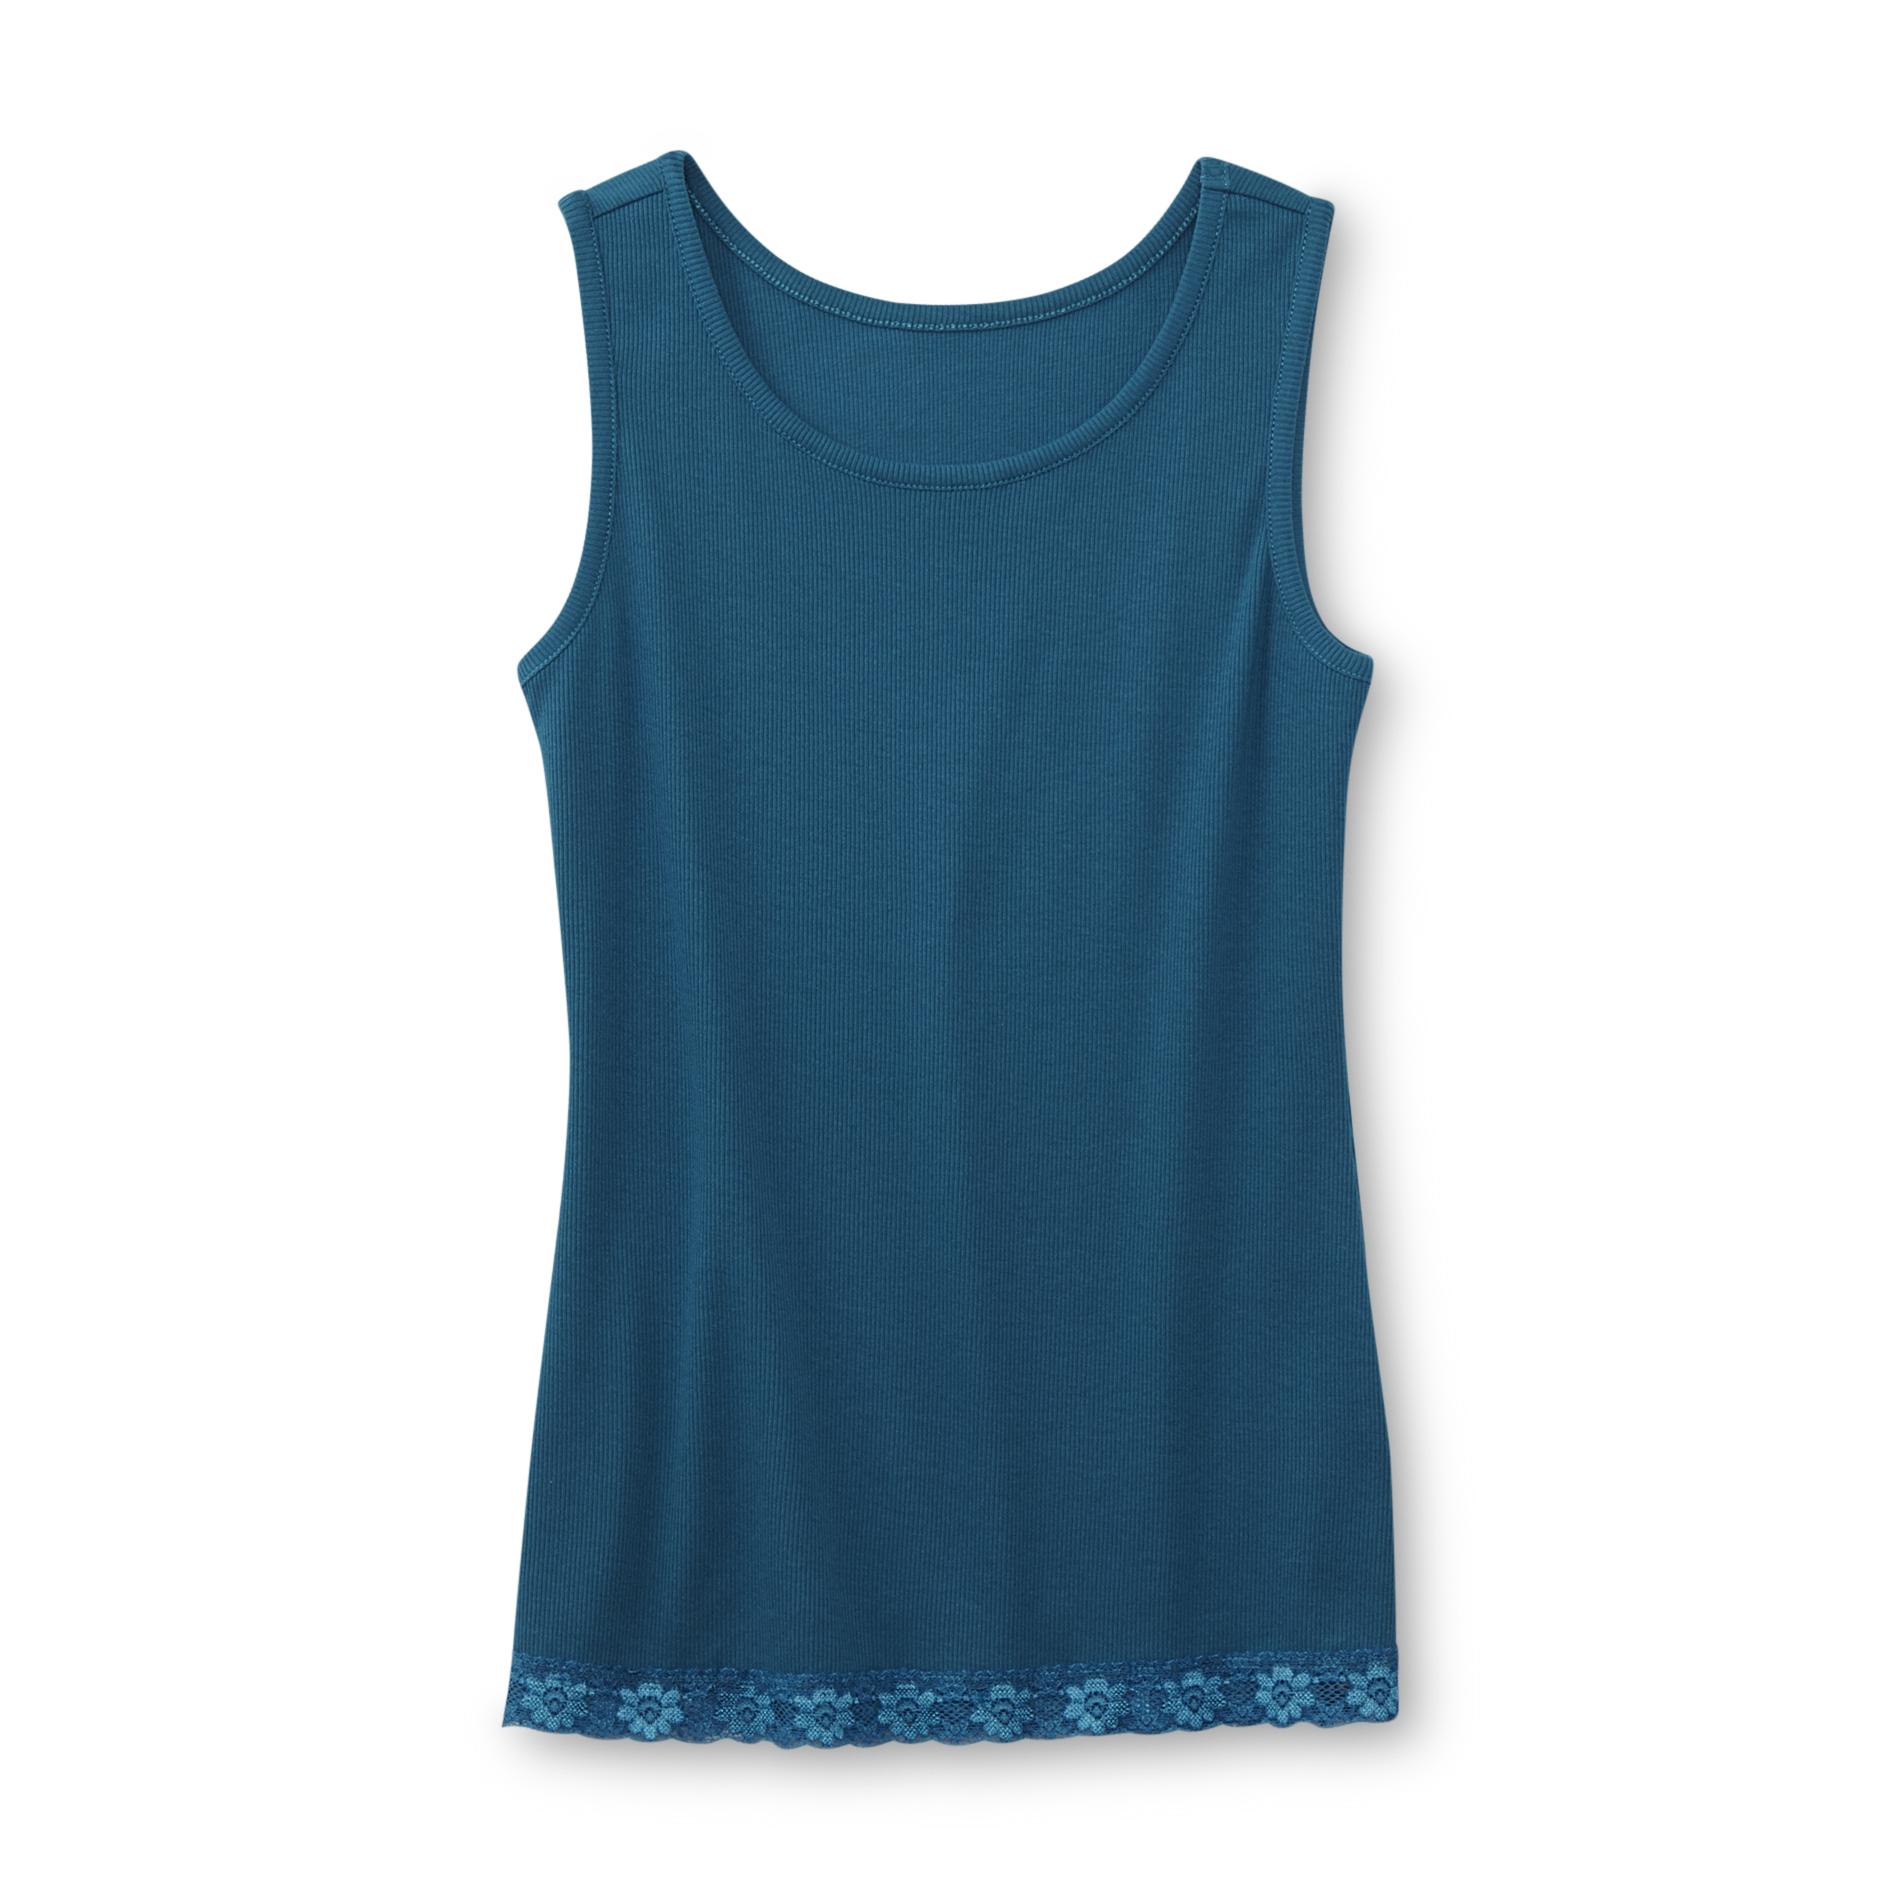 Simply Styled Girl's Tank Top